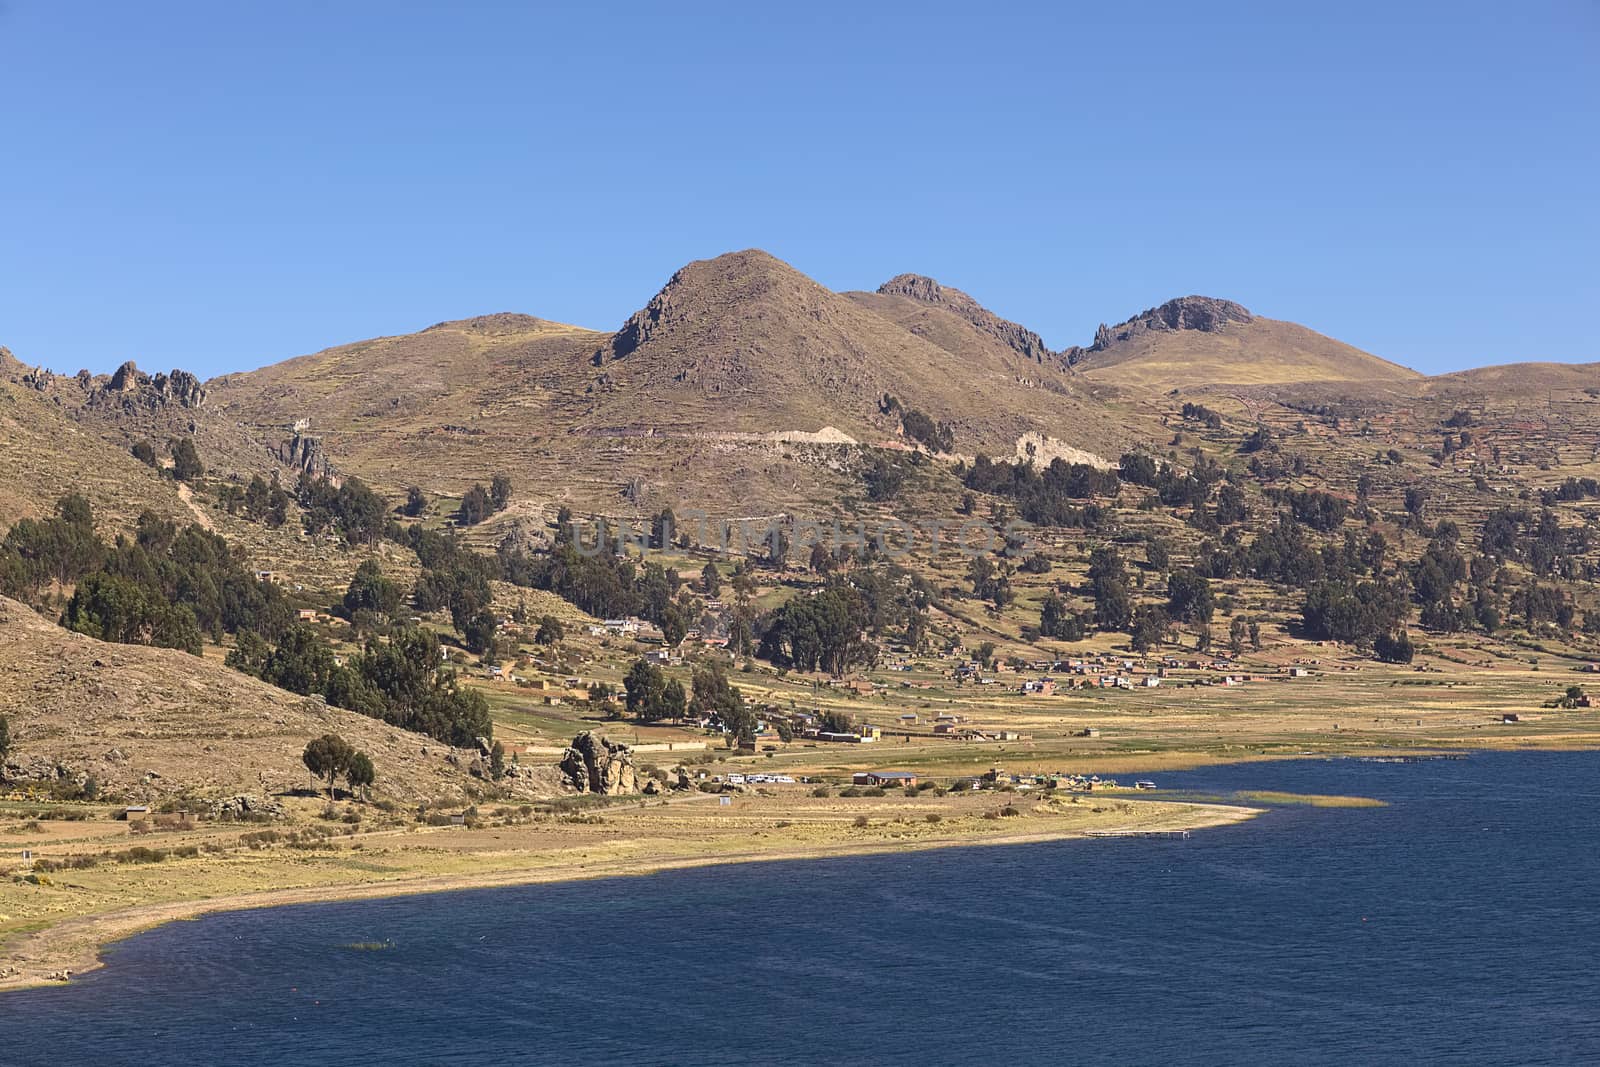 Rural landscape along the shore of Lake Titicaca close to the small tourist town of Copacabana in Bolivia